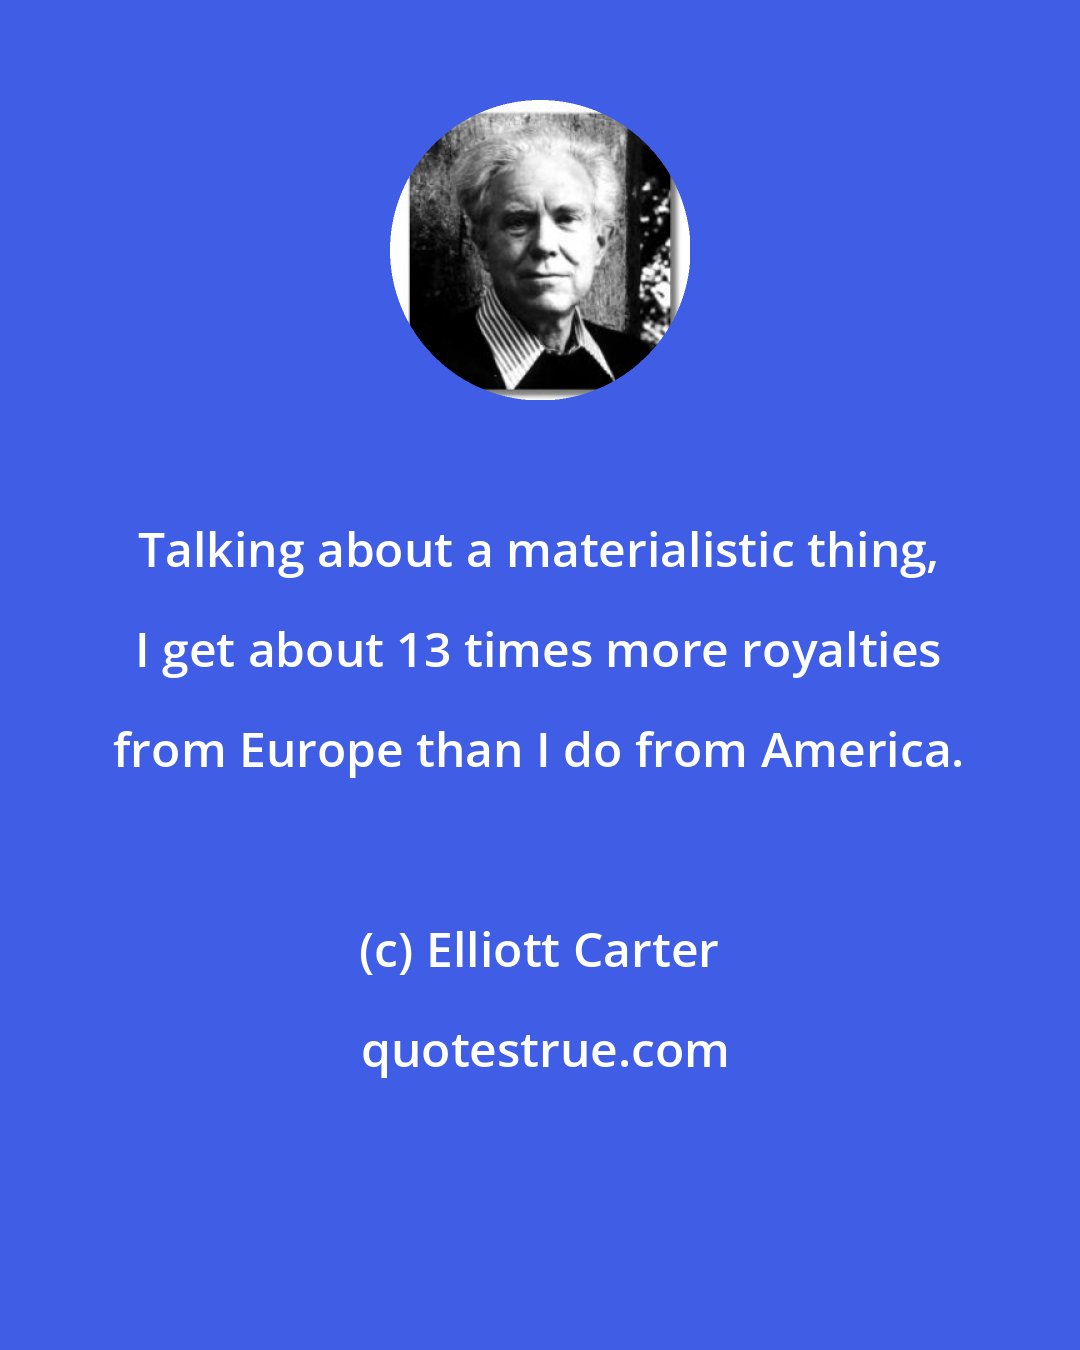 Elliott Carter: Talking about a materialistic thing, I get about 13 times more royalties from Europe than I do from America.